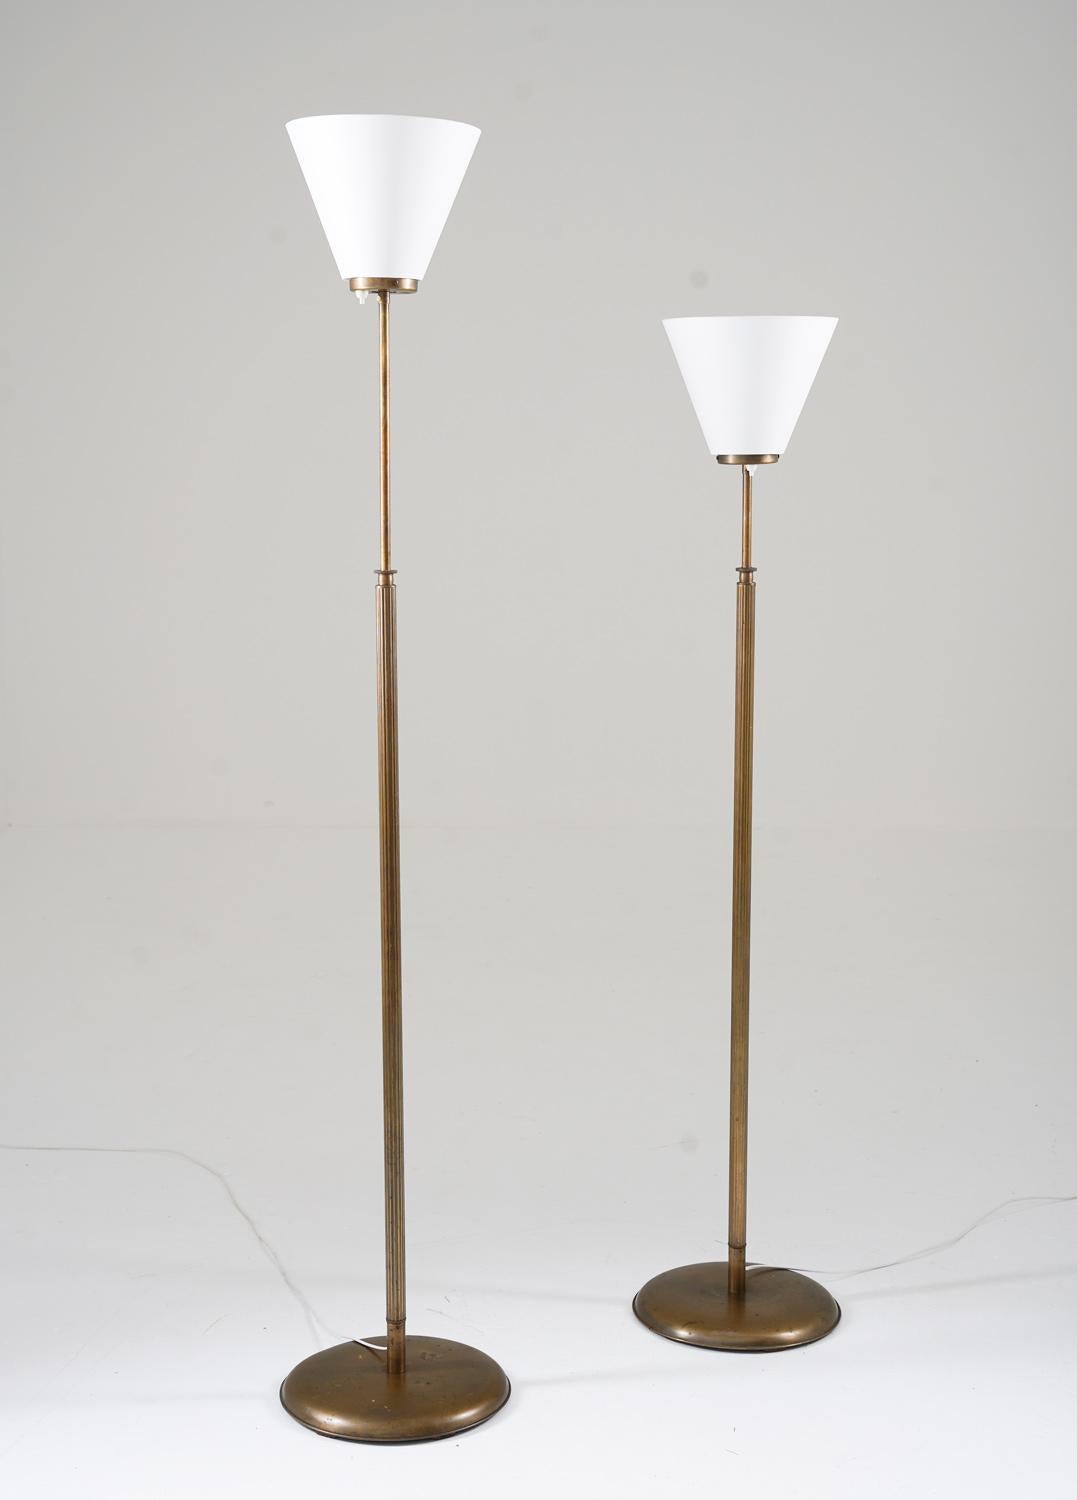 Pair of Swedesh Modern uplight floor lamps by HW armatur, Sweden, 1940s.
The lamps are adjustable in height between 134-177cm (53-70